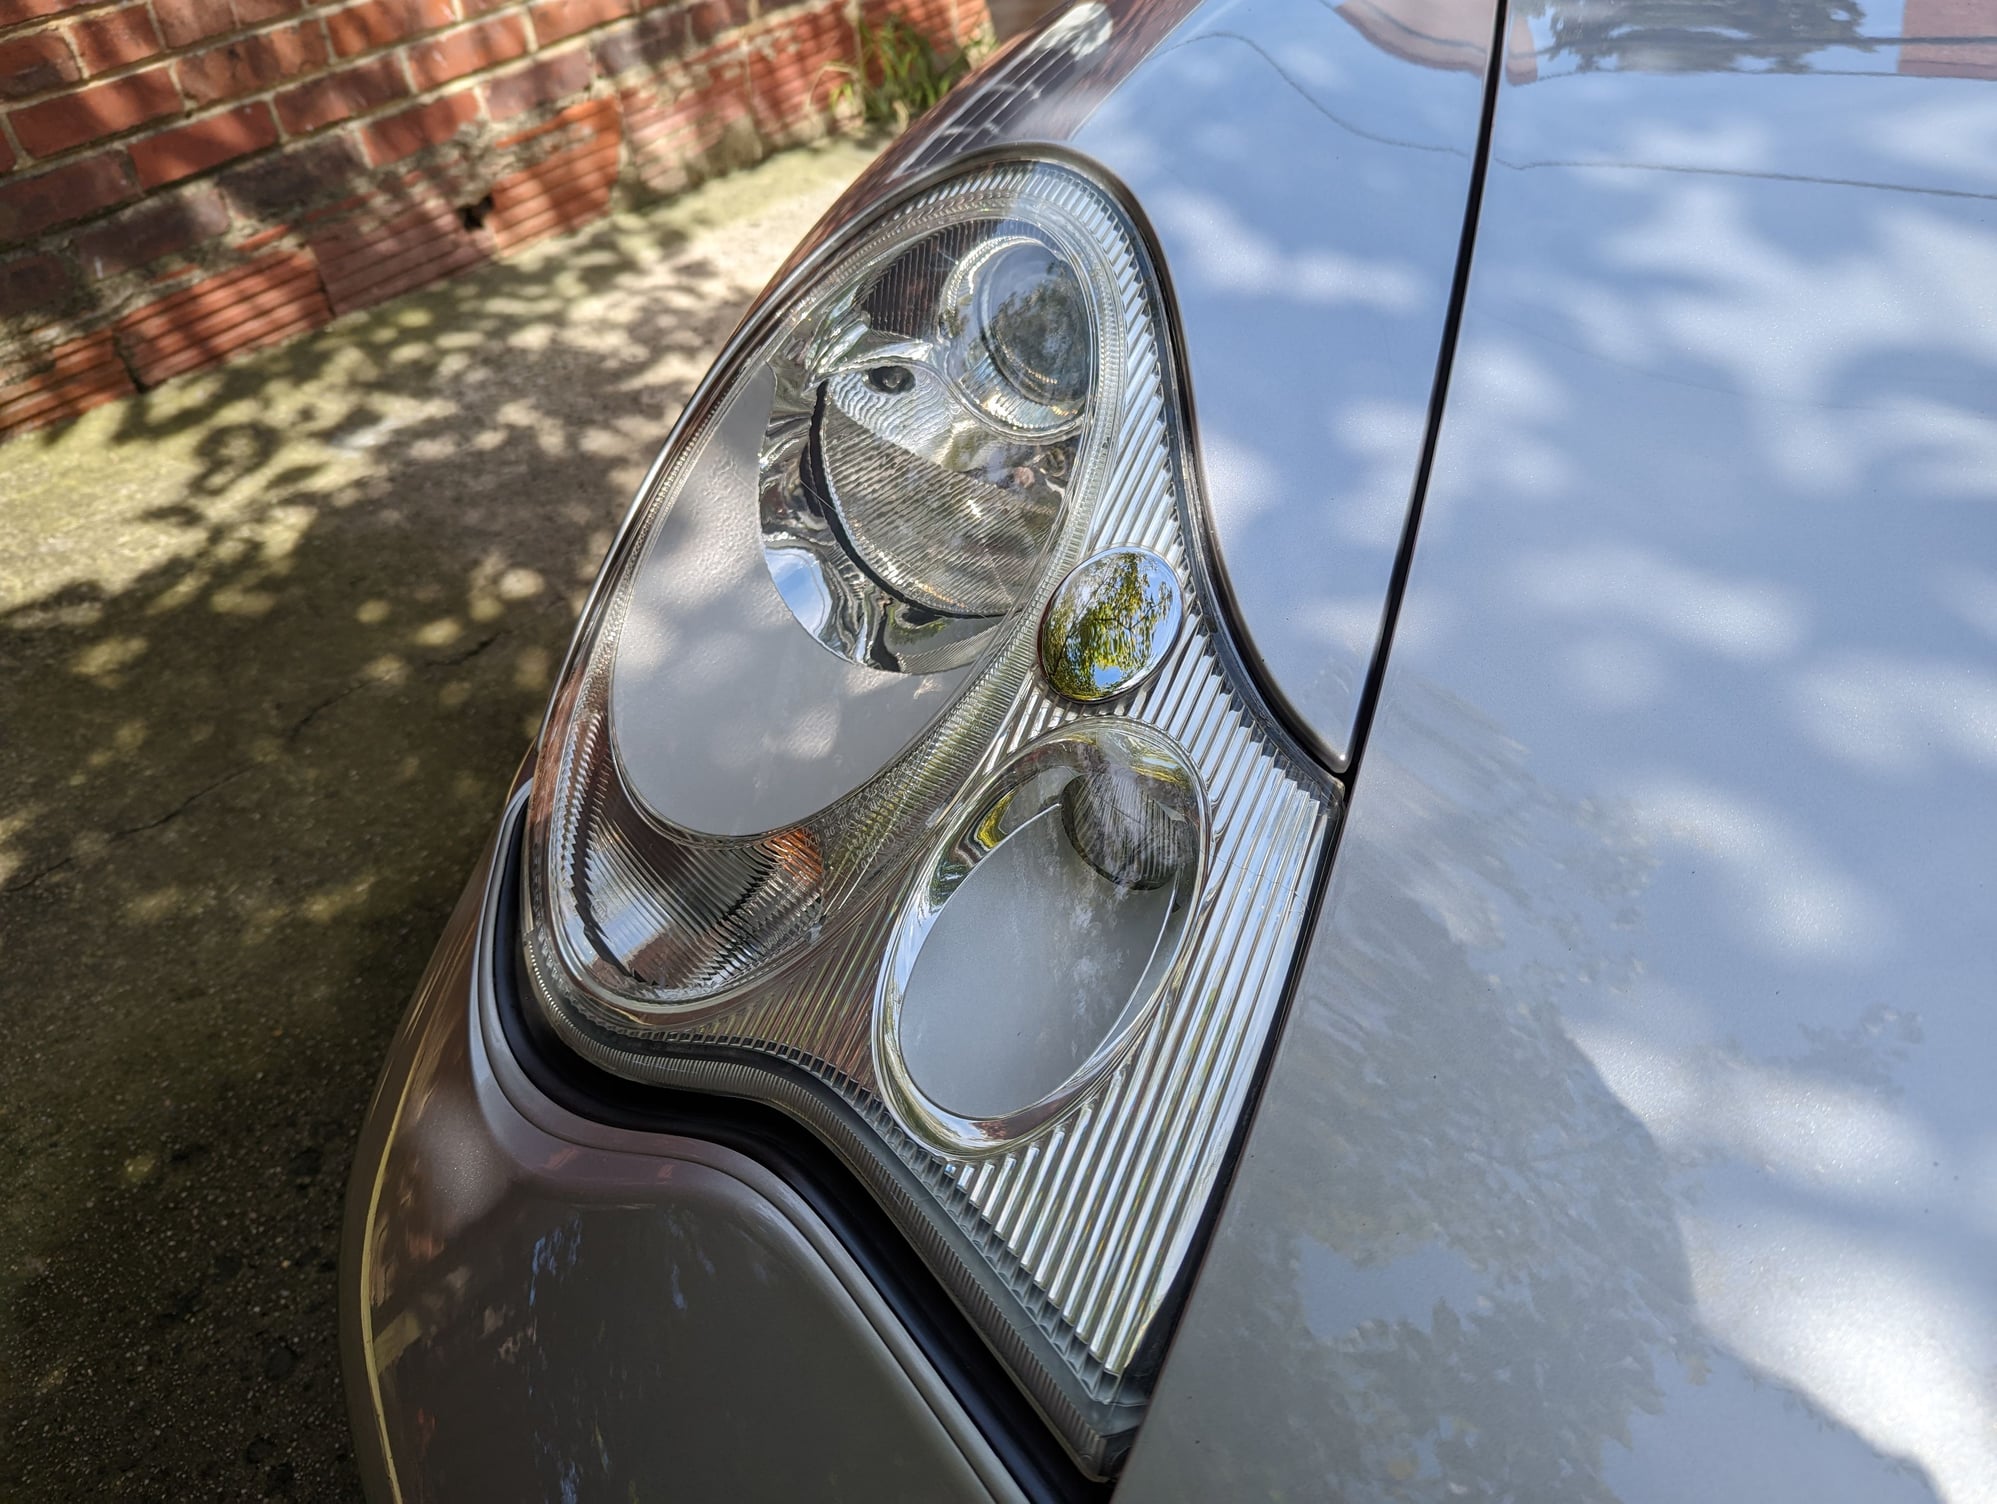 Any experience with ceracote jut for headlight restoration